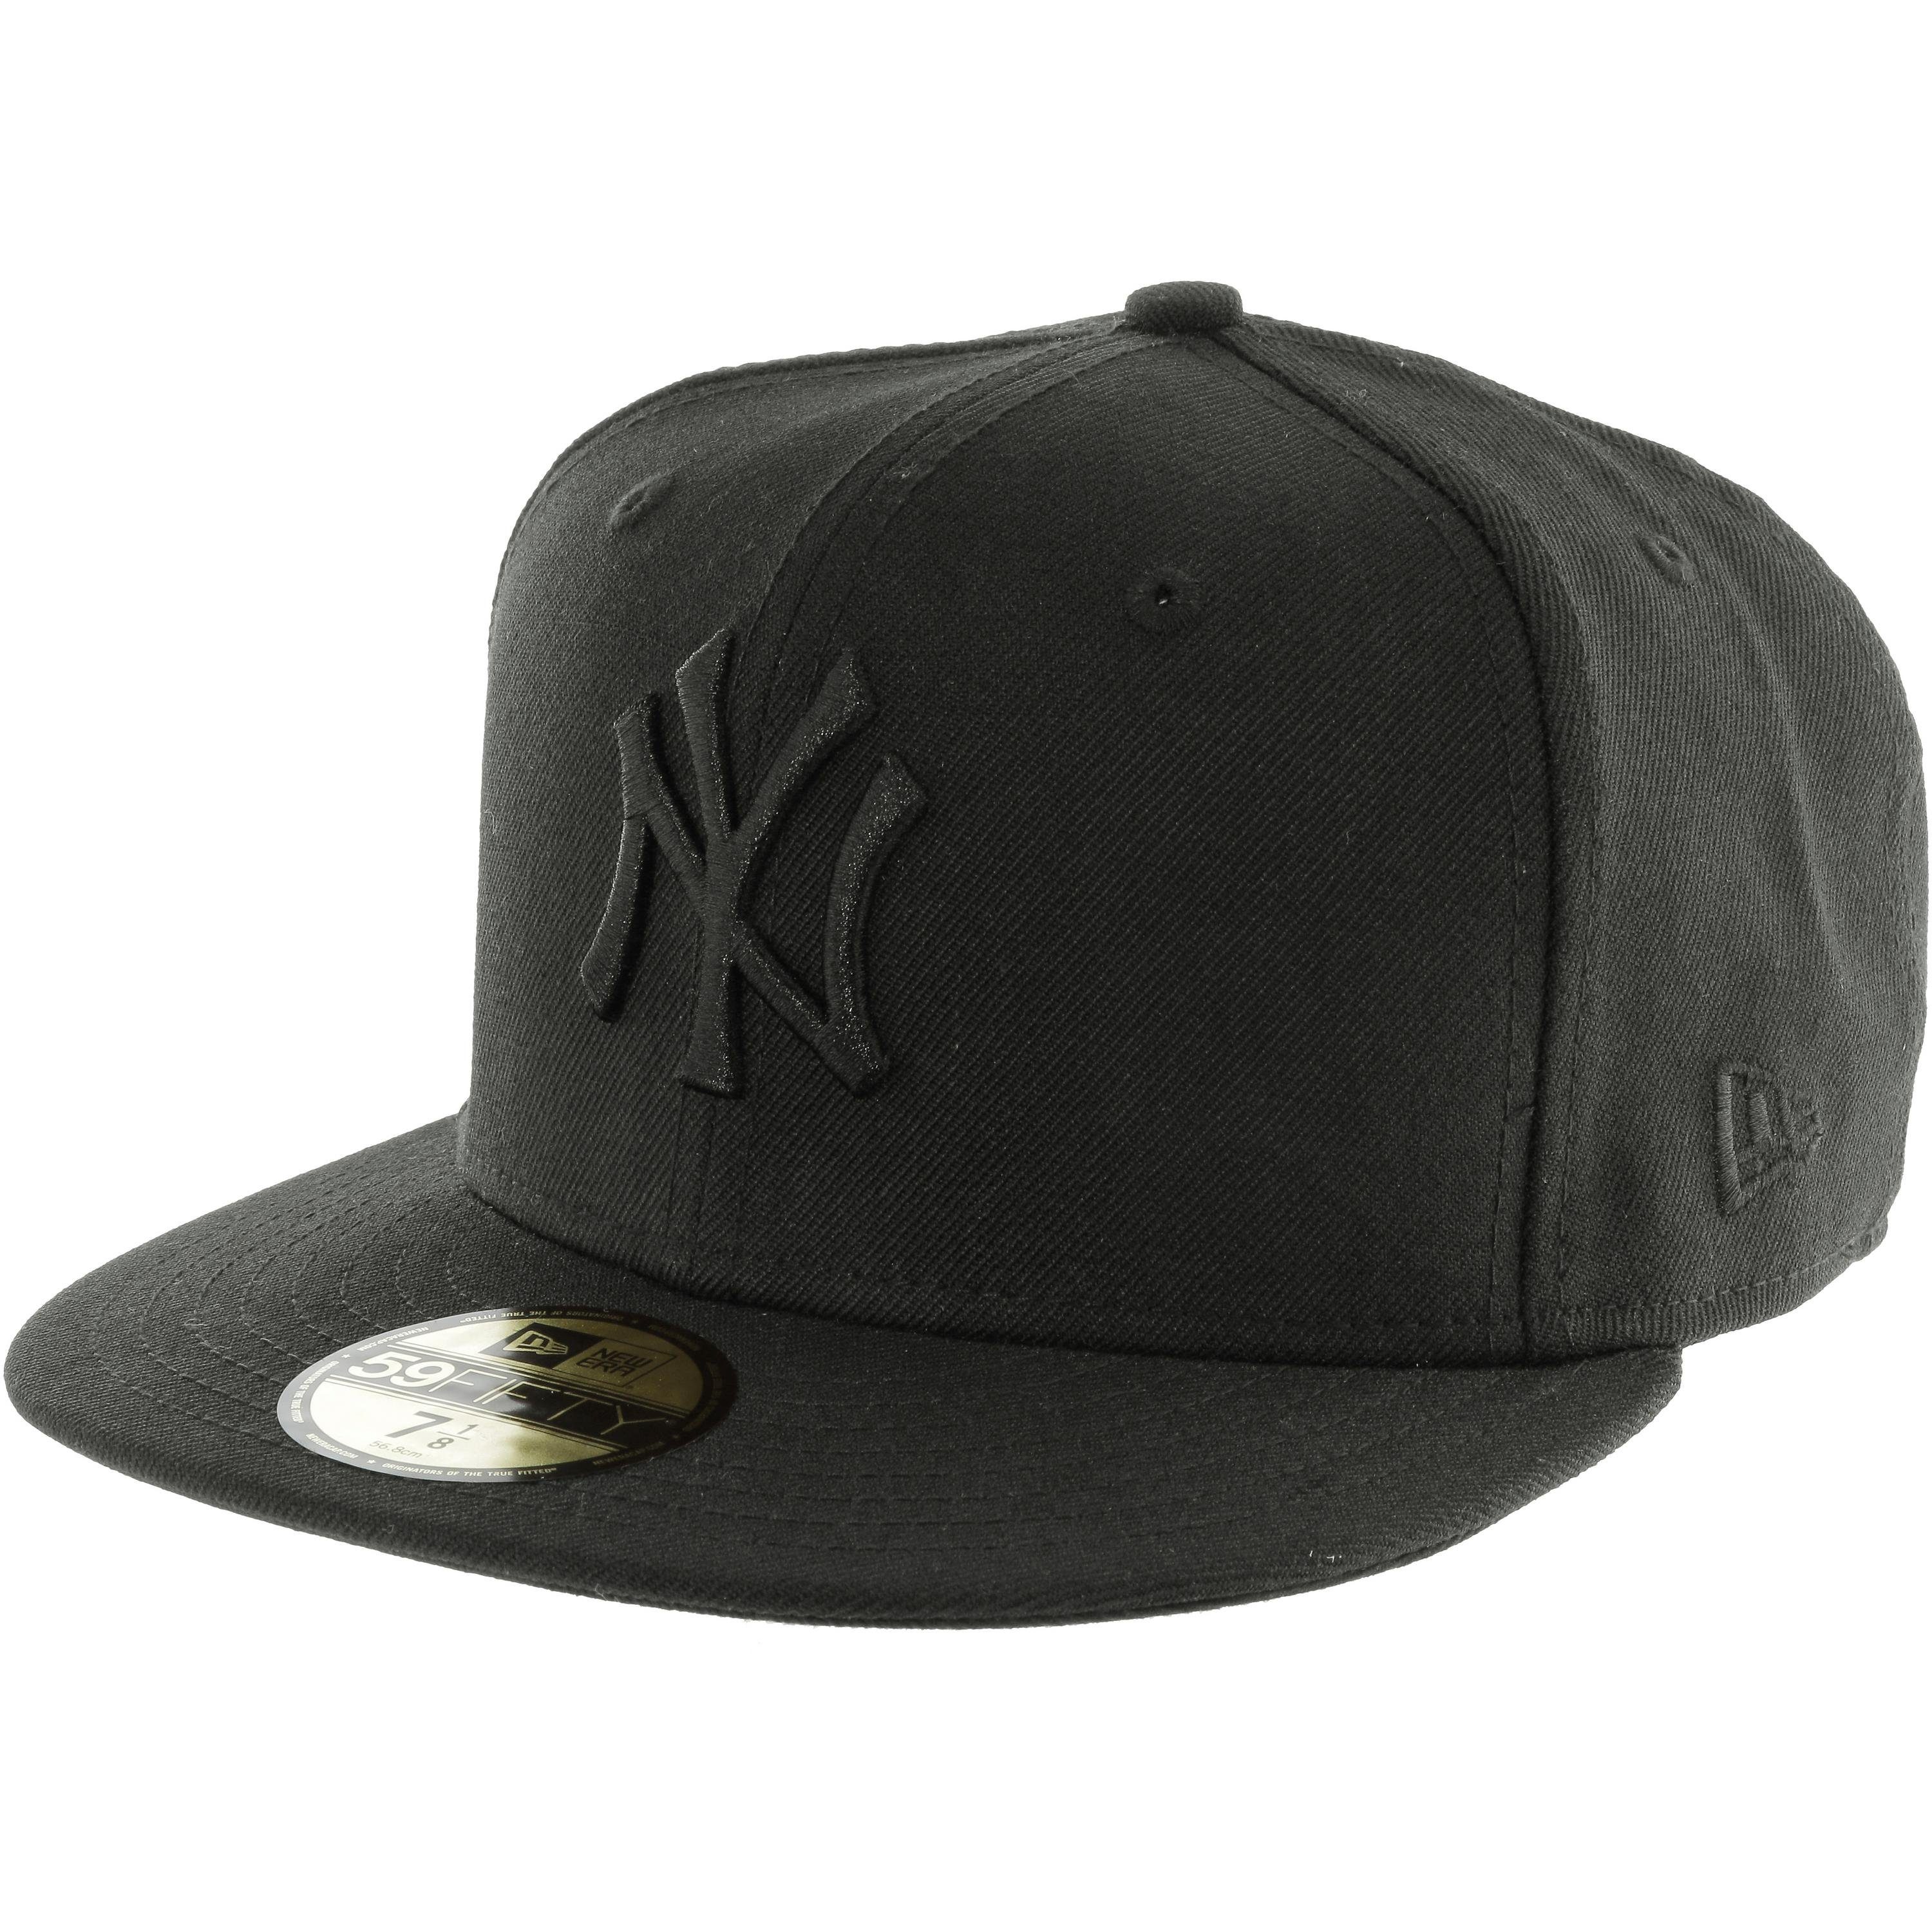 New Era Fitted Cap 59fifty NY Yankees schwarz